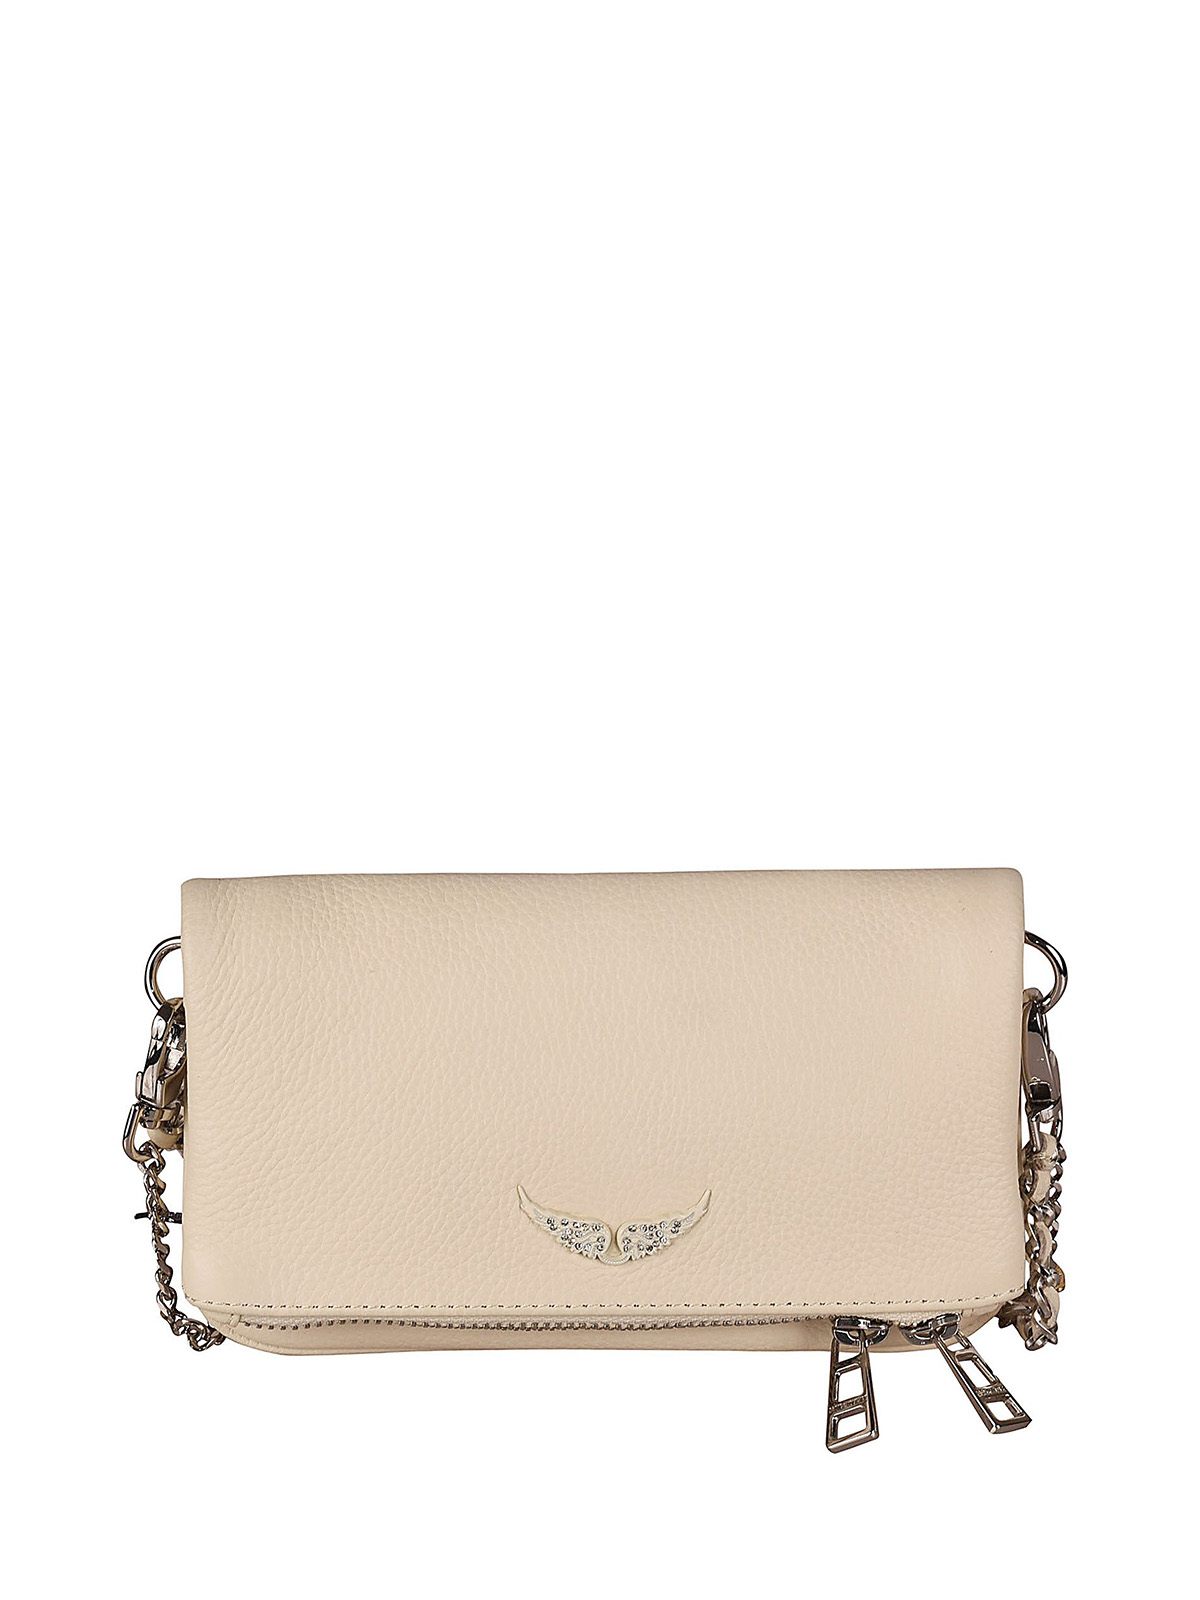 Cross body bags Zadig&Voltaire - Swing Your Wings leather crossbody bag ...